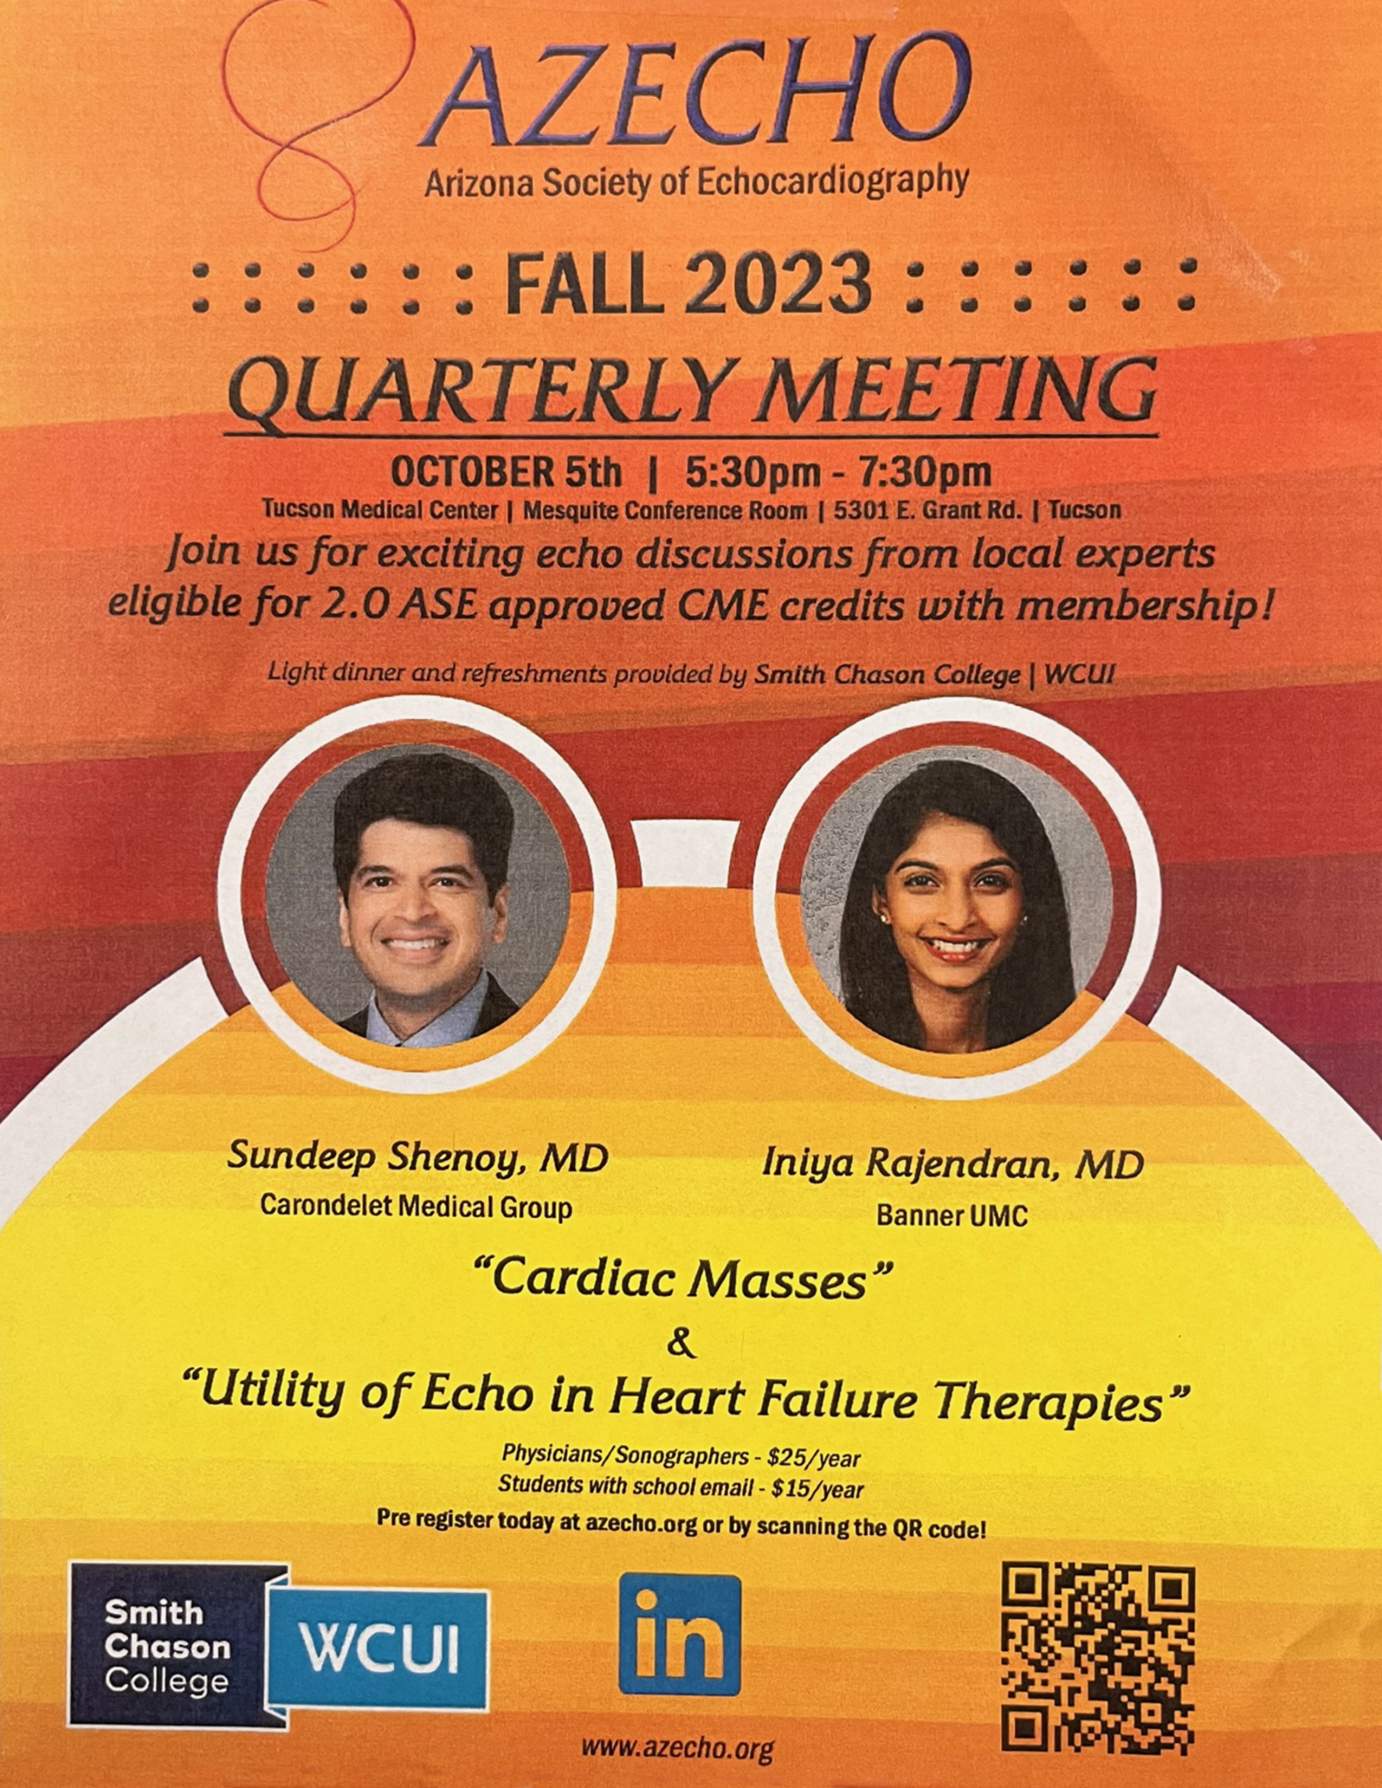 [Image of flyer for Arizona Society of Echocardiography fall quarterly meeting at TMC, 10/5/23]